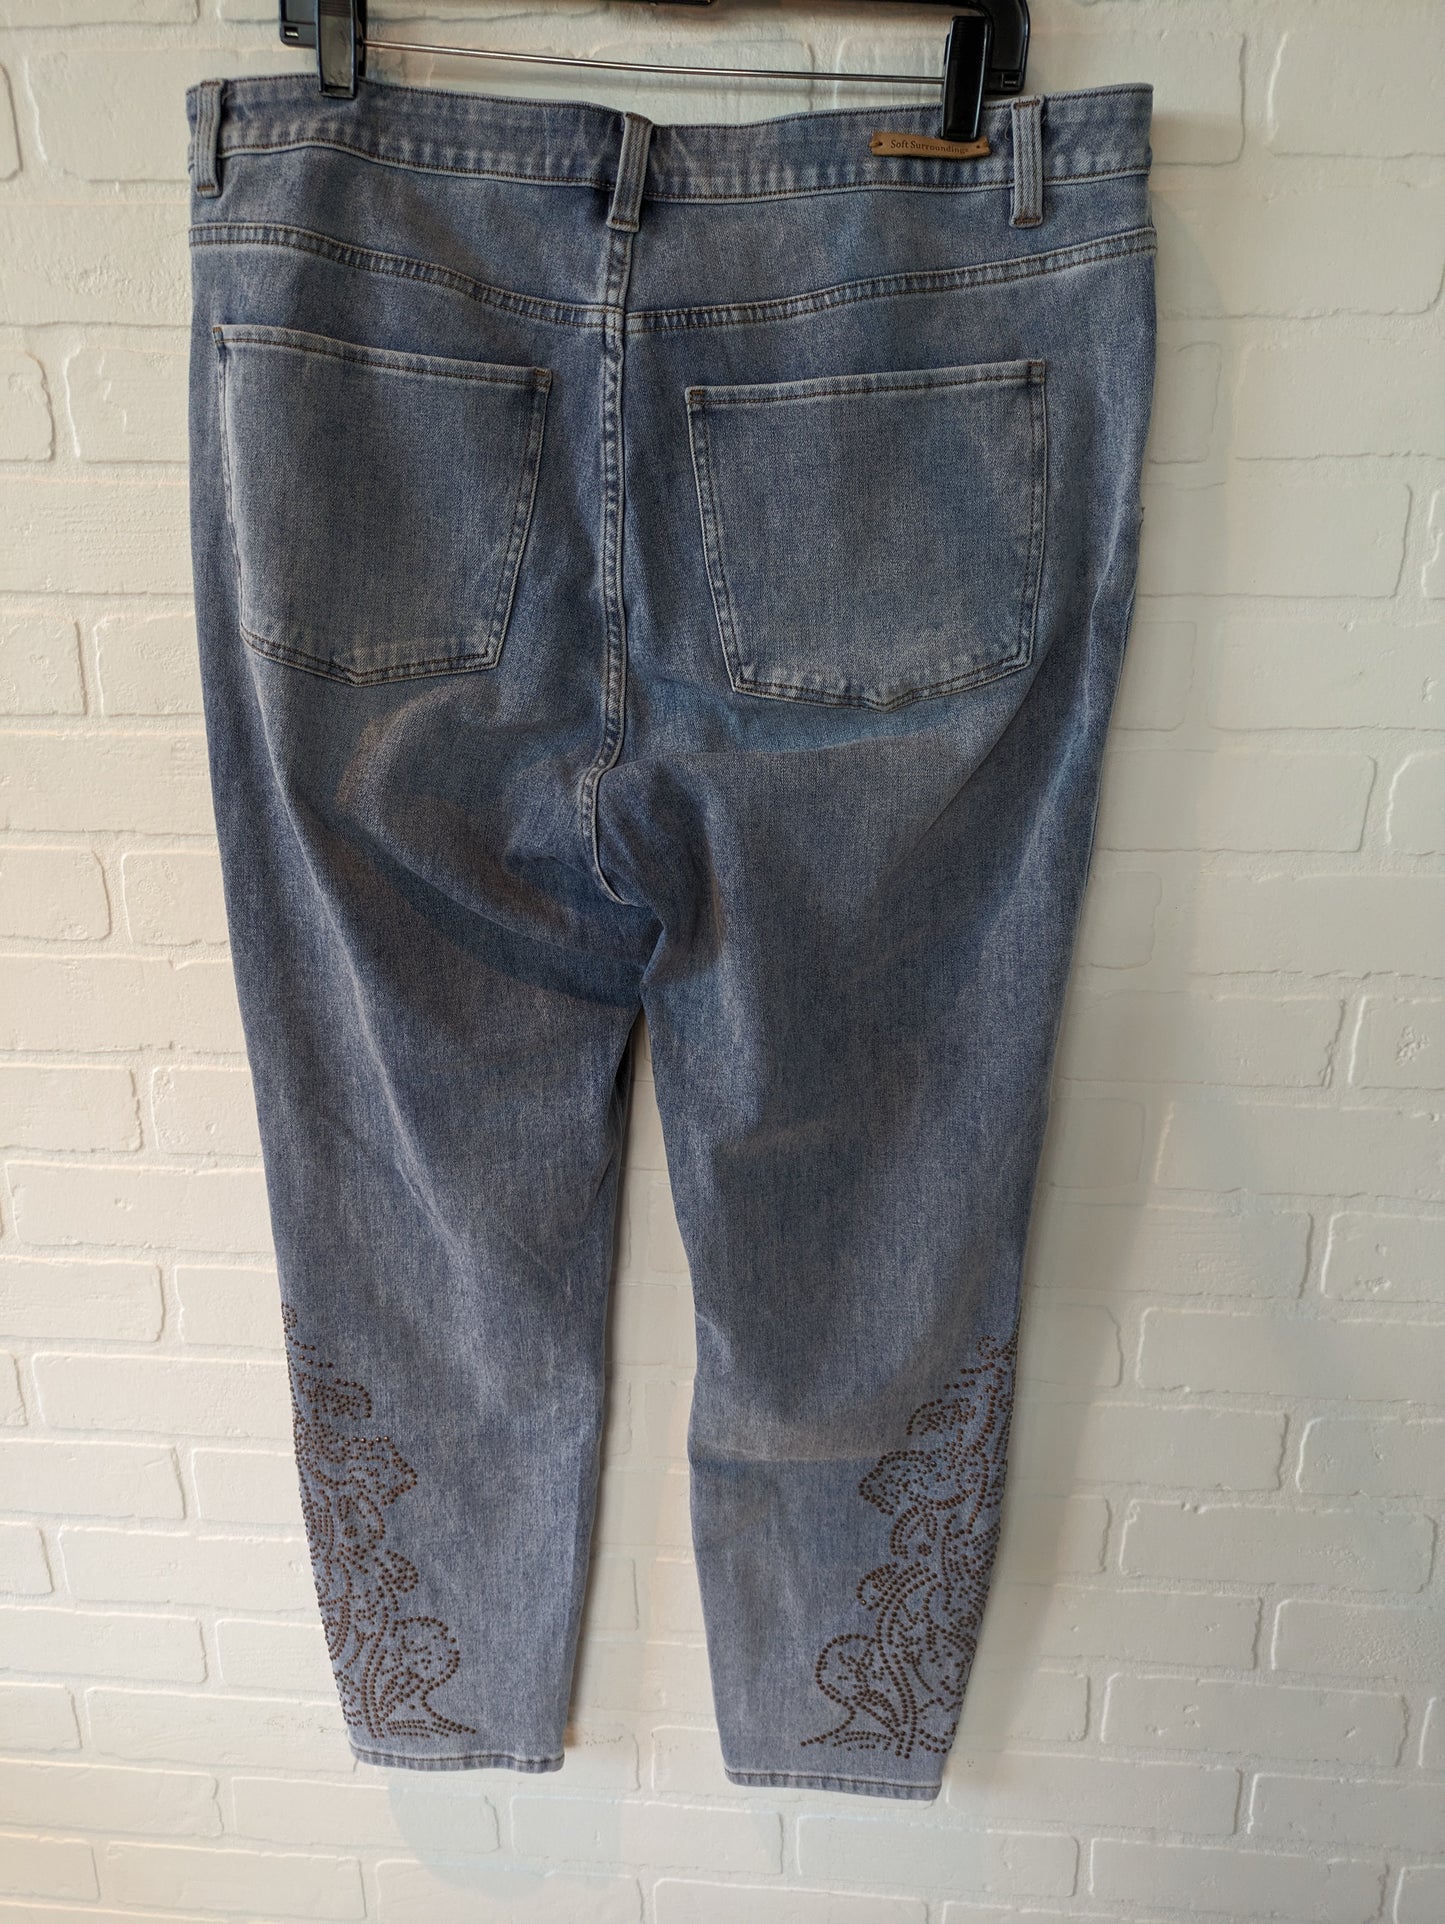 Jeans Straight By Soft Surroundings  Size: 18